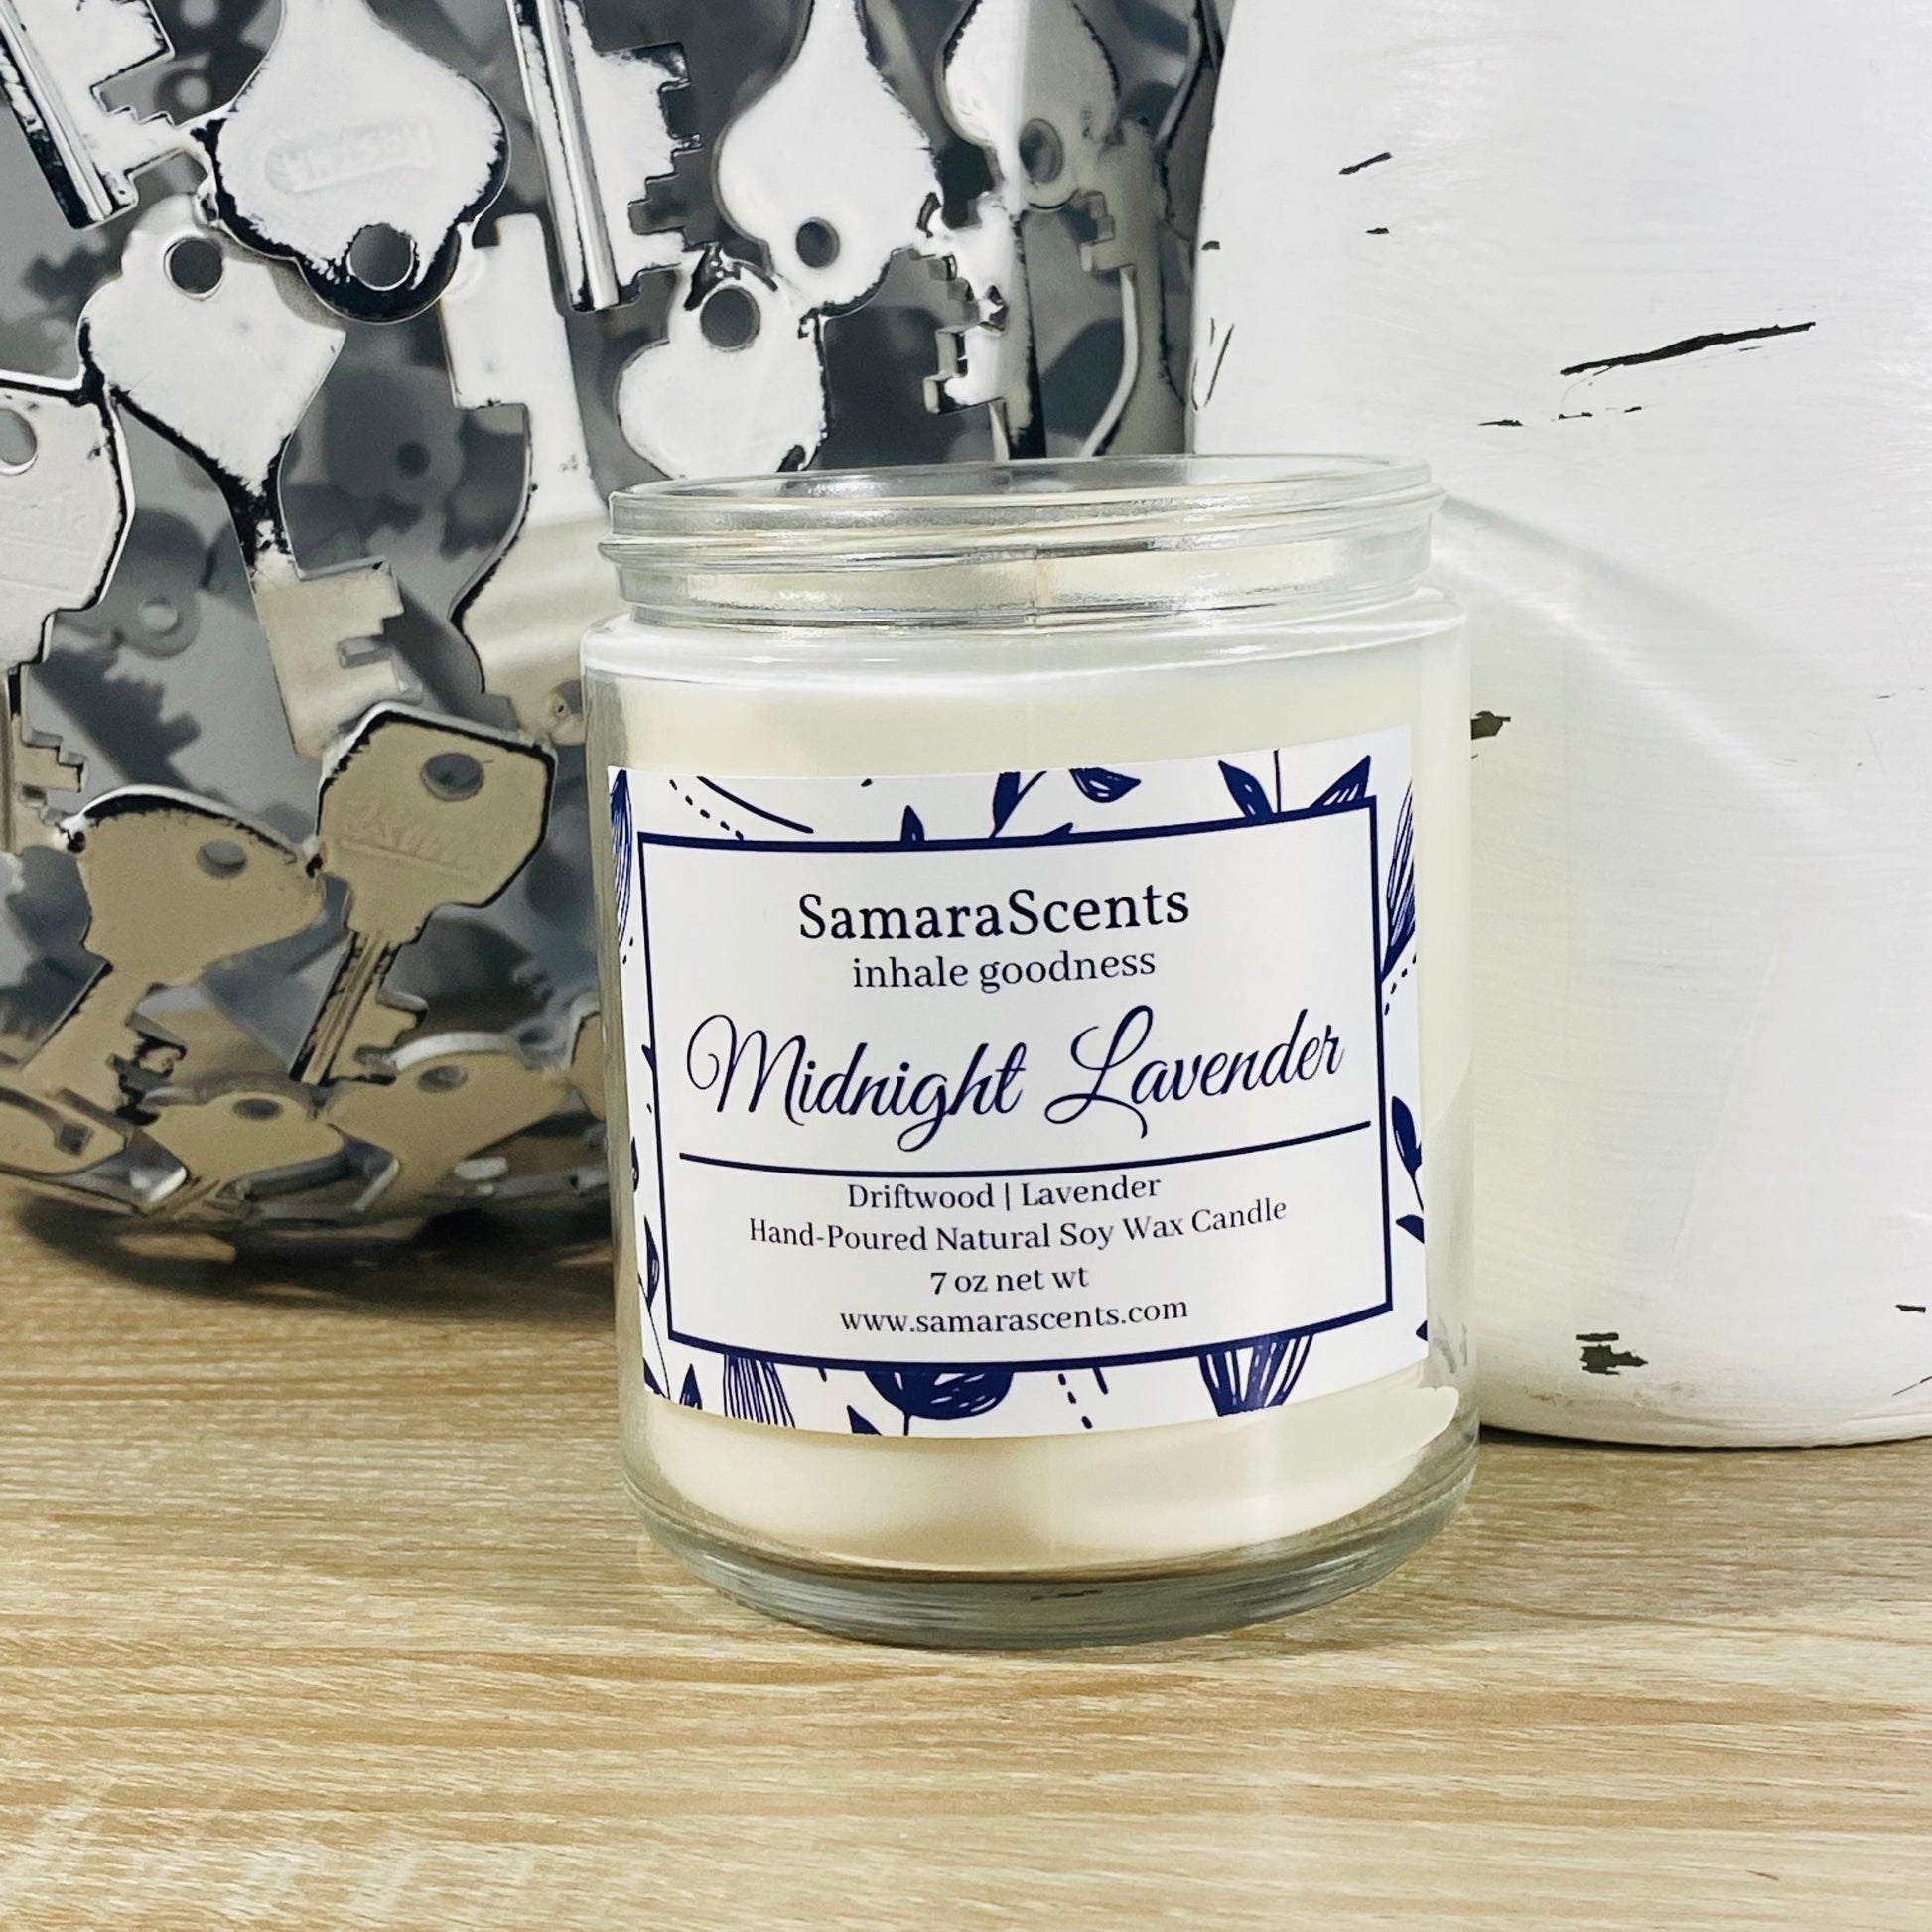 Lavender Musk Candle